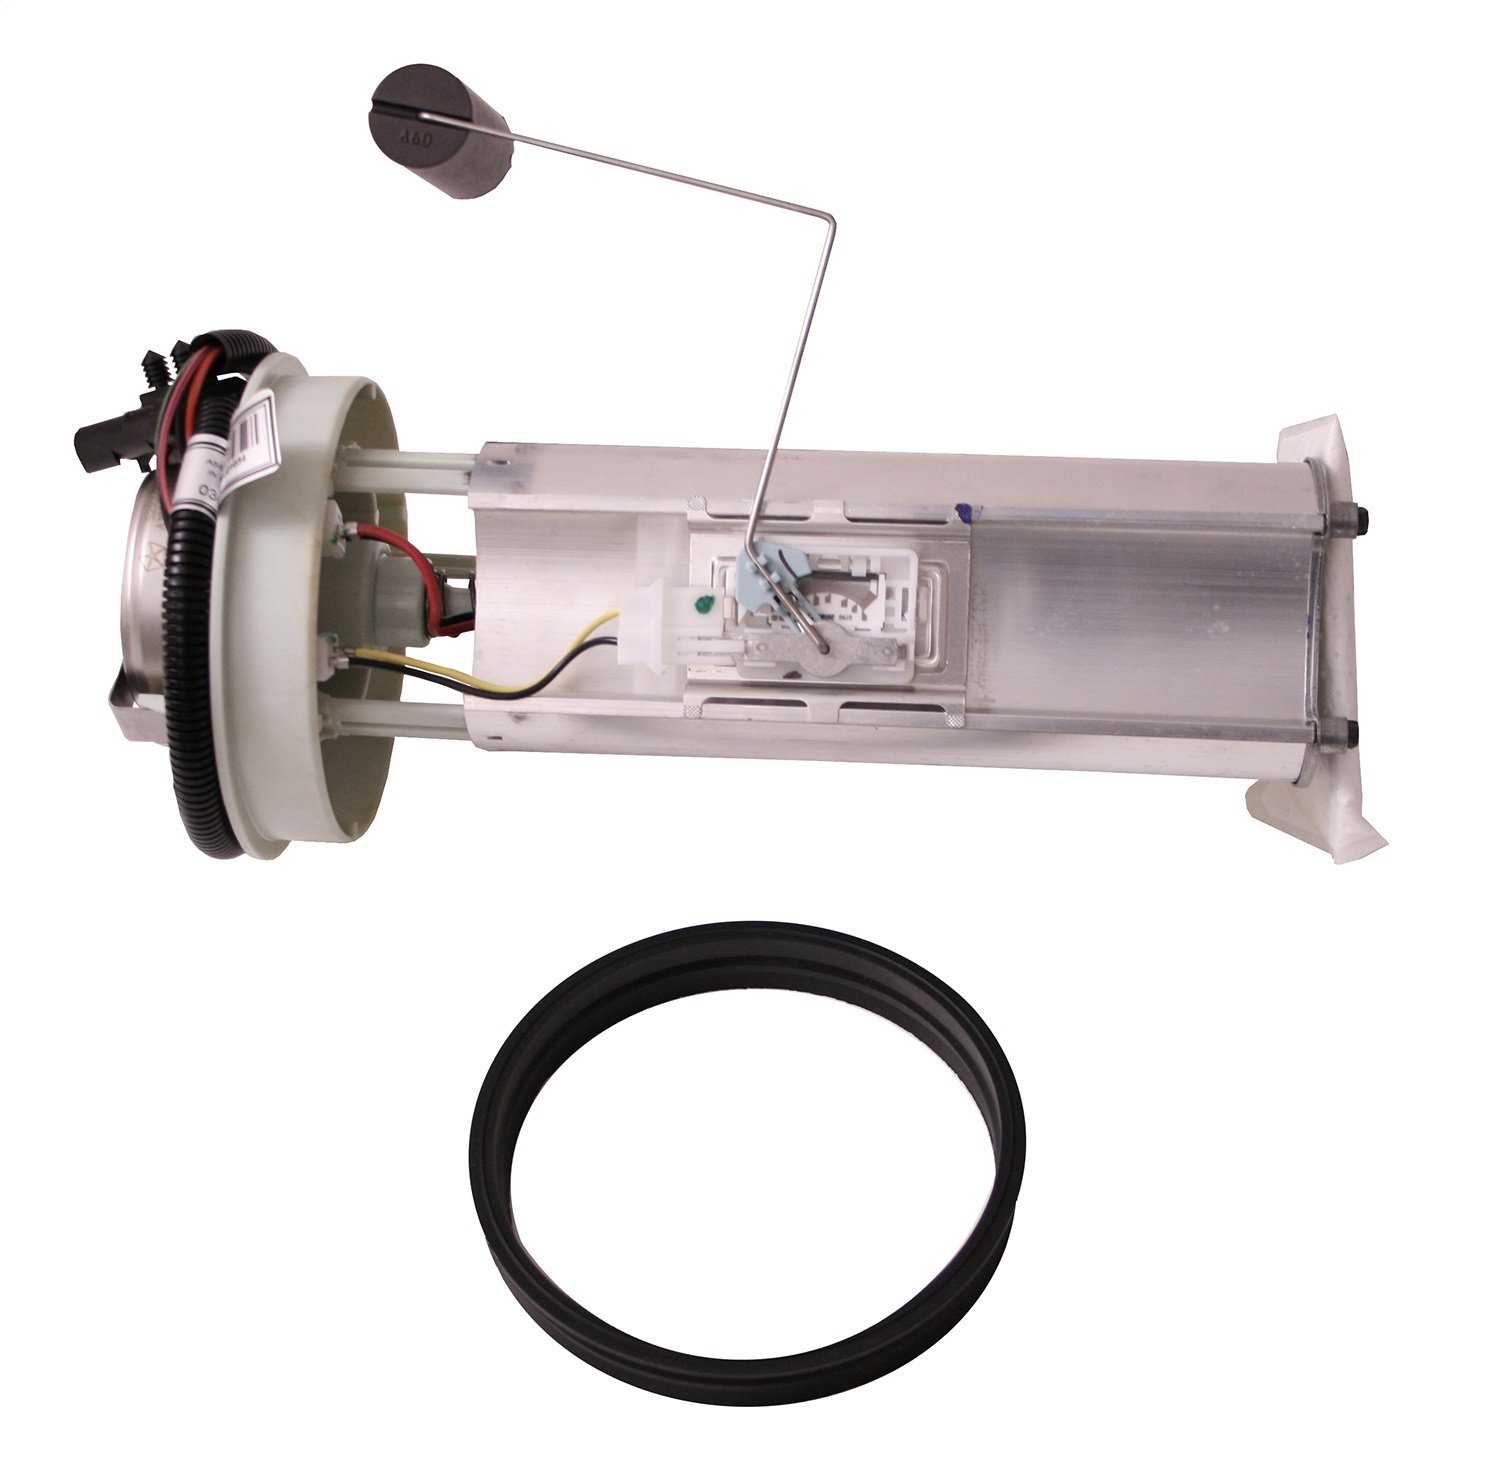 Replacement fuel pump module from Omix-ADA, Fits 97-02 Jeep Wrangler TJ with a 2.5L or 4.0L engi